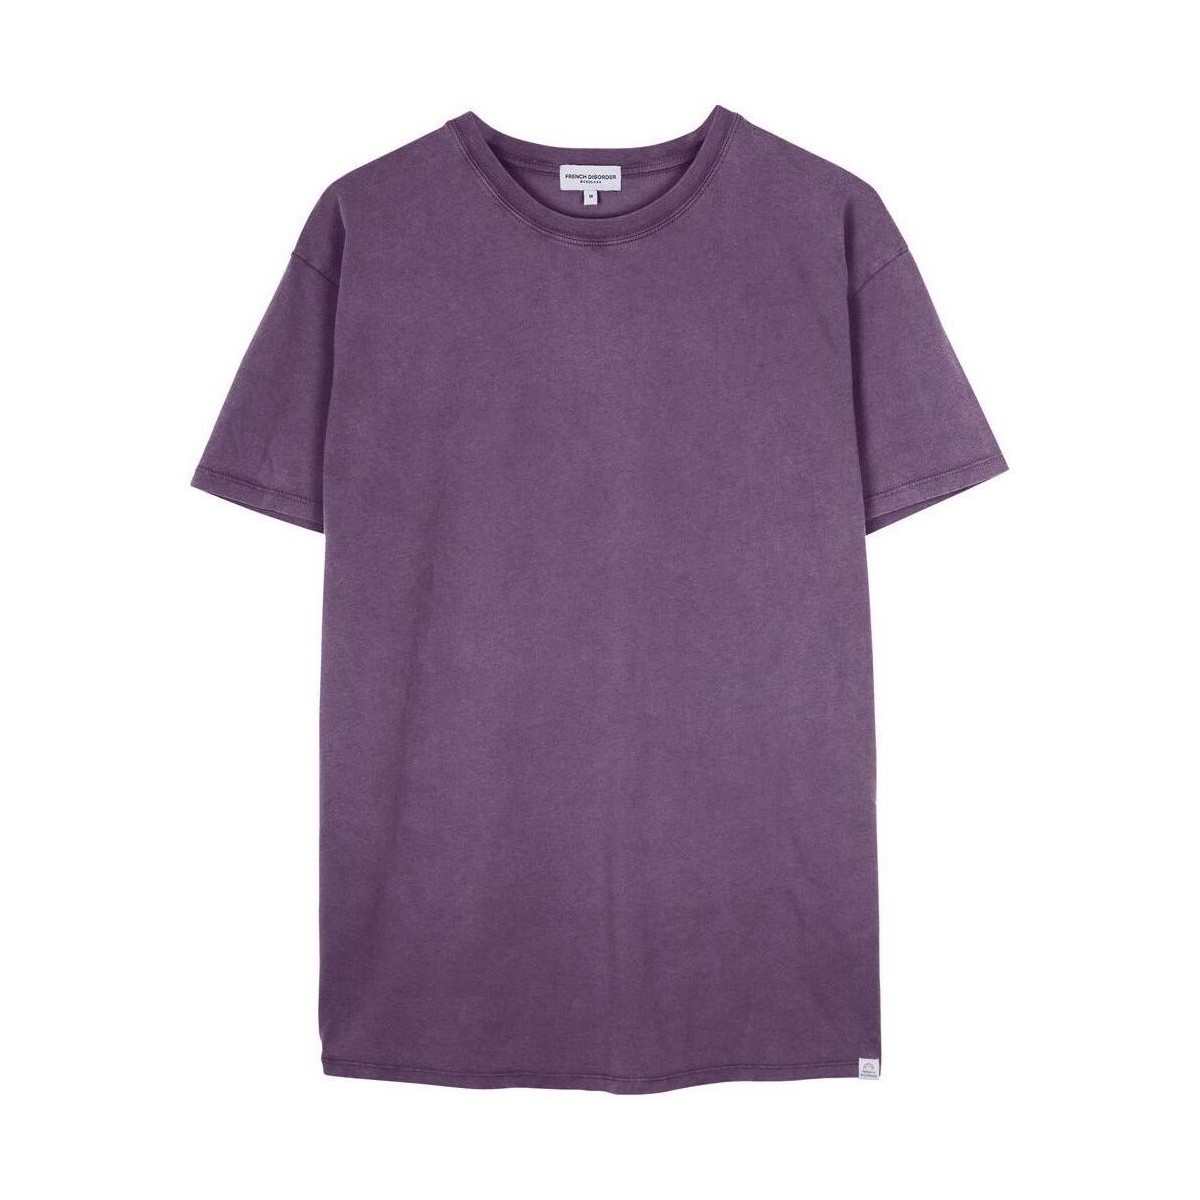 Kleidung Damen T-Shirts French Disorder T-shirt femme  Mika Washed Violett